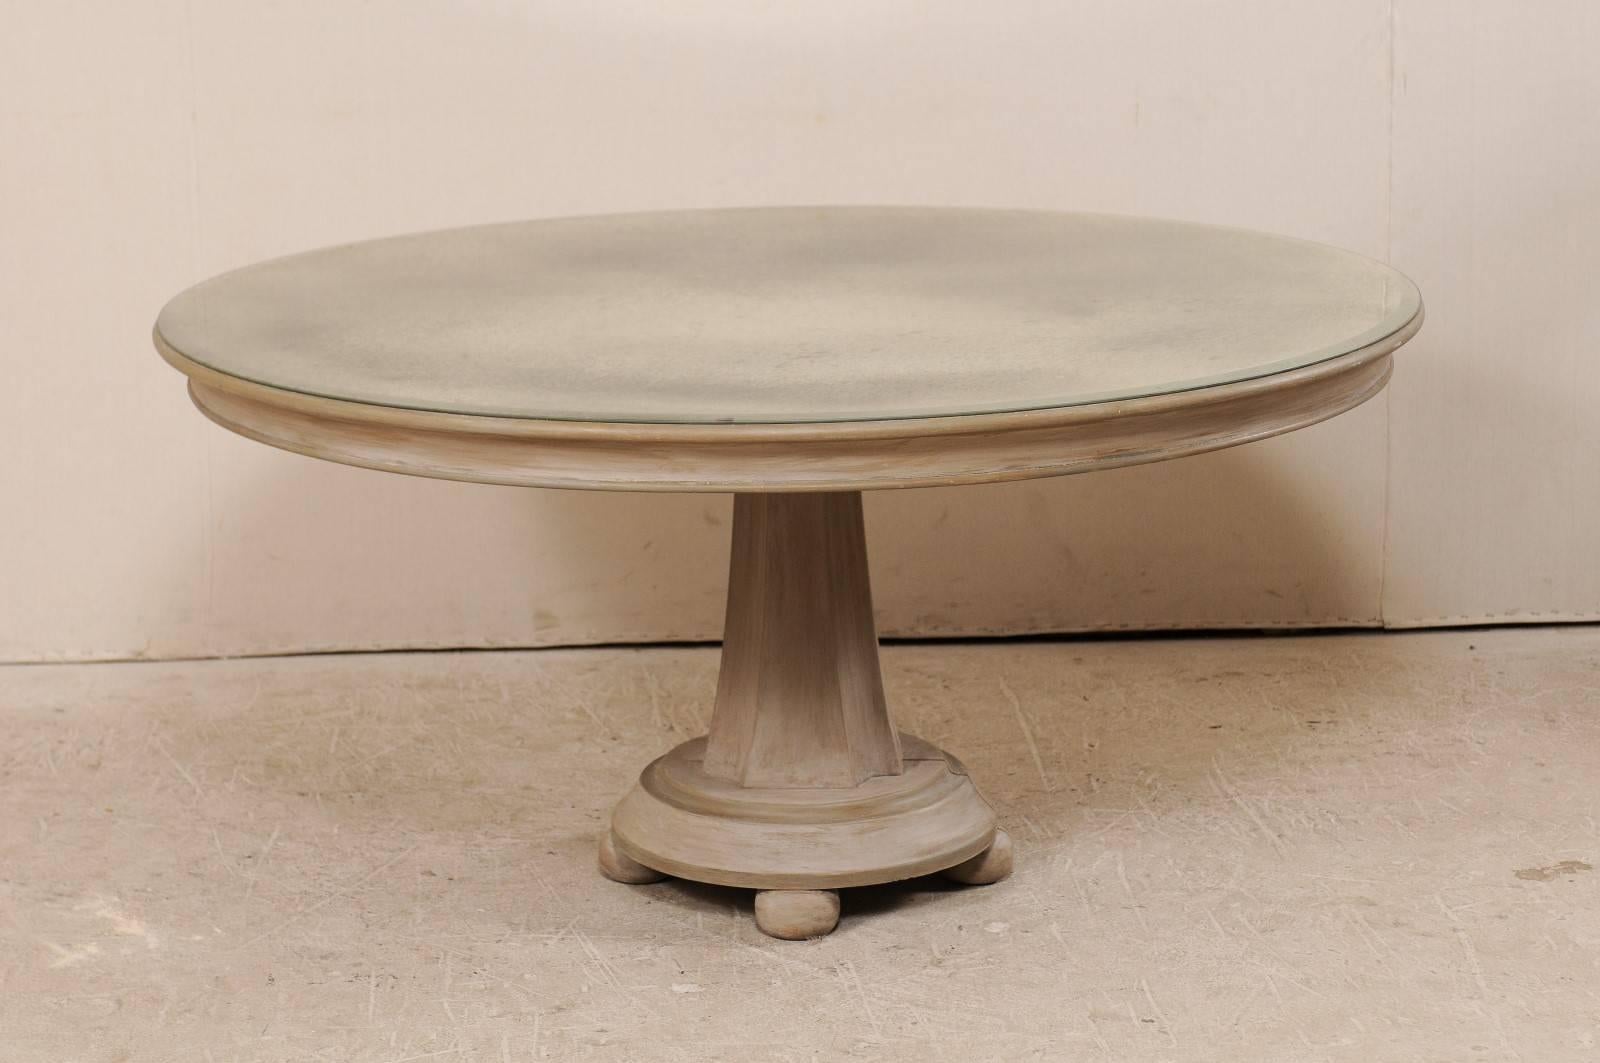 Carved Vintage Large Round Pedestal Table with Unique Antiqued Mirrored Top